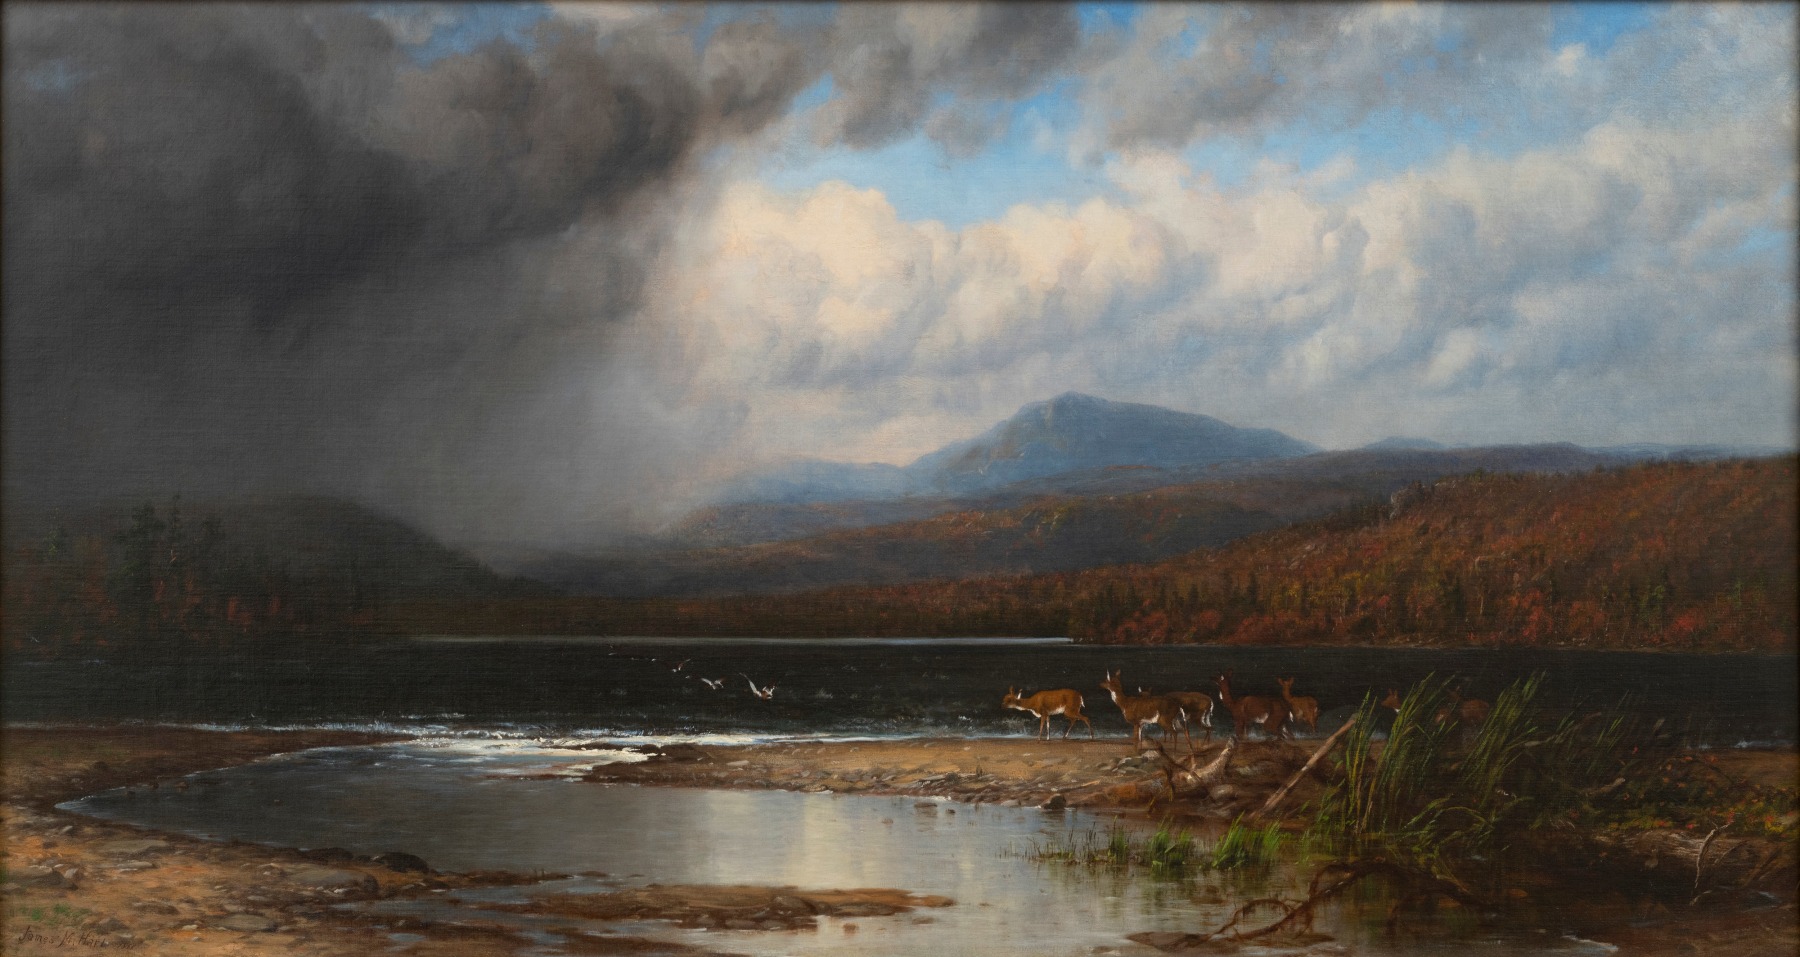 James M. Hart (1828–1901). Approaching Storm, Adirondacks, 1866. Oil on canvas, 24 x 46 in., signed and dated lower left: James M. Hart 1866